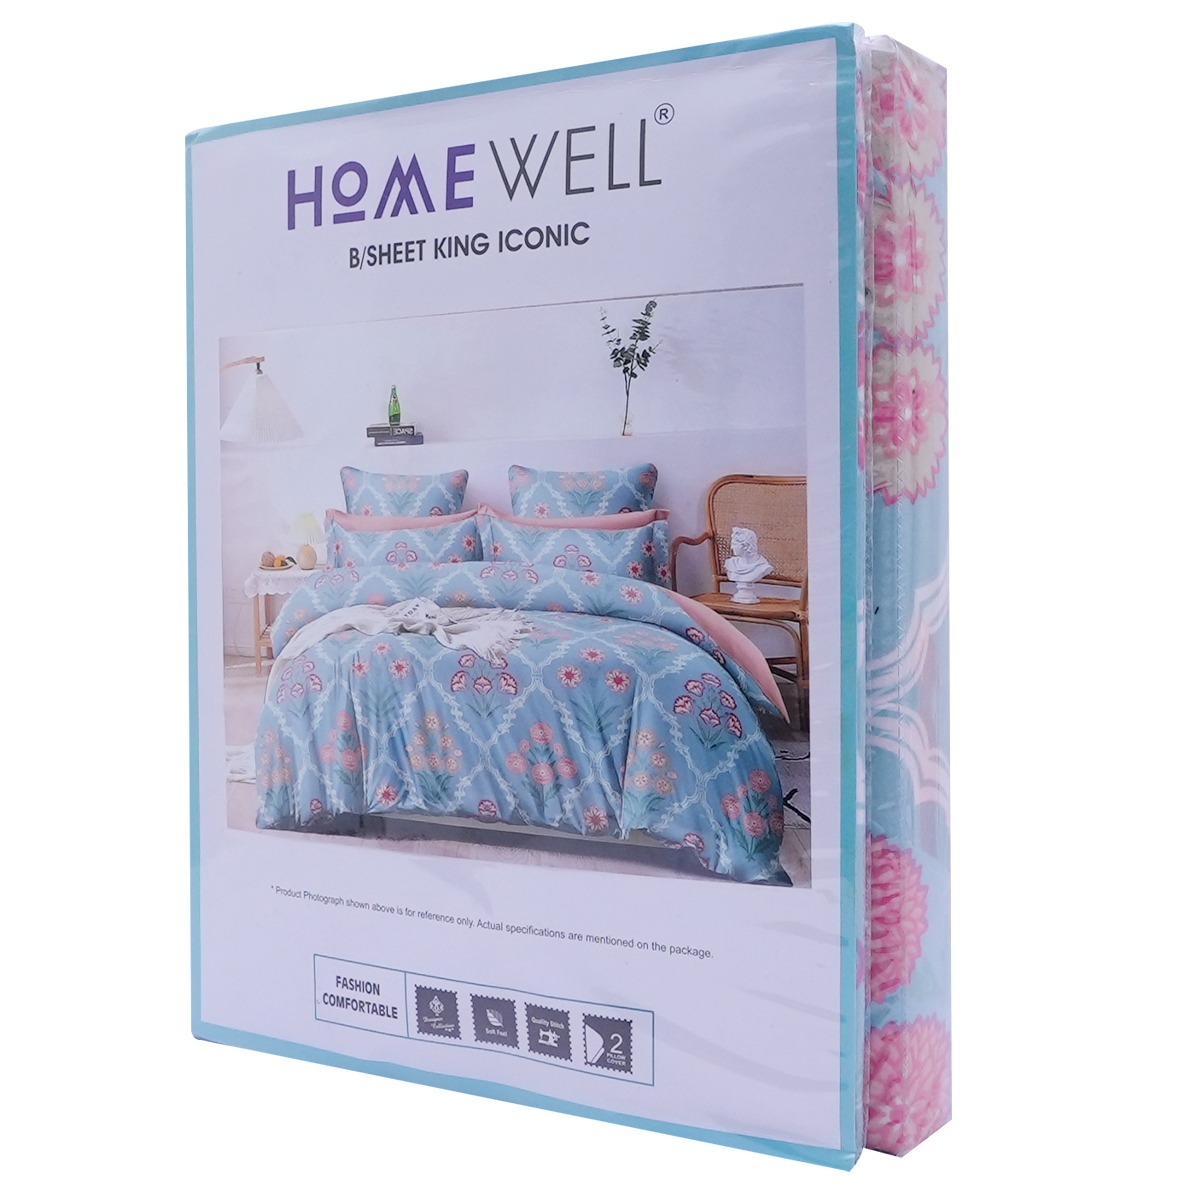 Home well Bed Sheet King size Iconic Bed Sheet Assorted Colour and Assorted Design | Set of 3